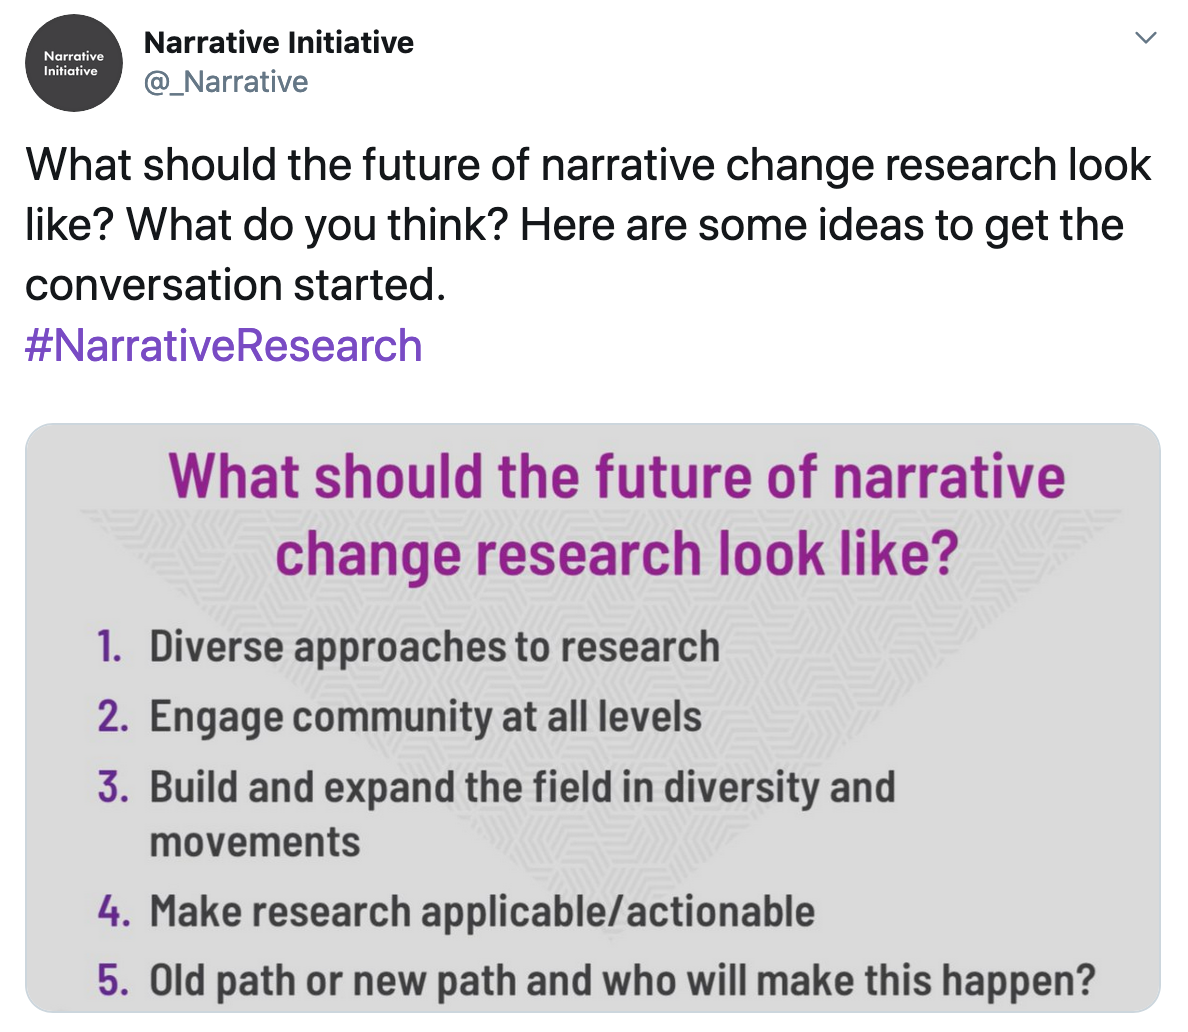 is narrative research a methodology